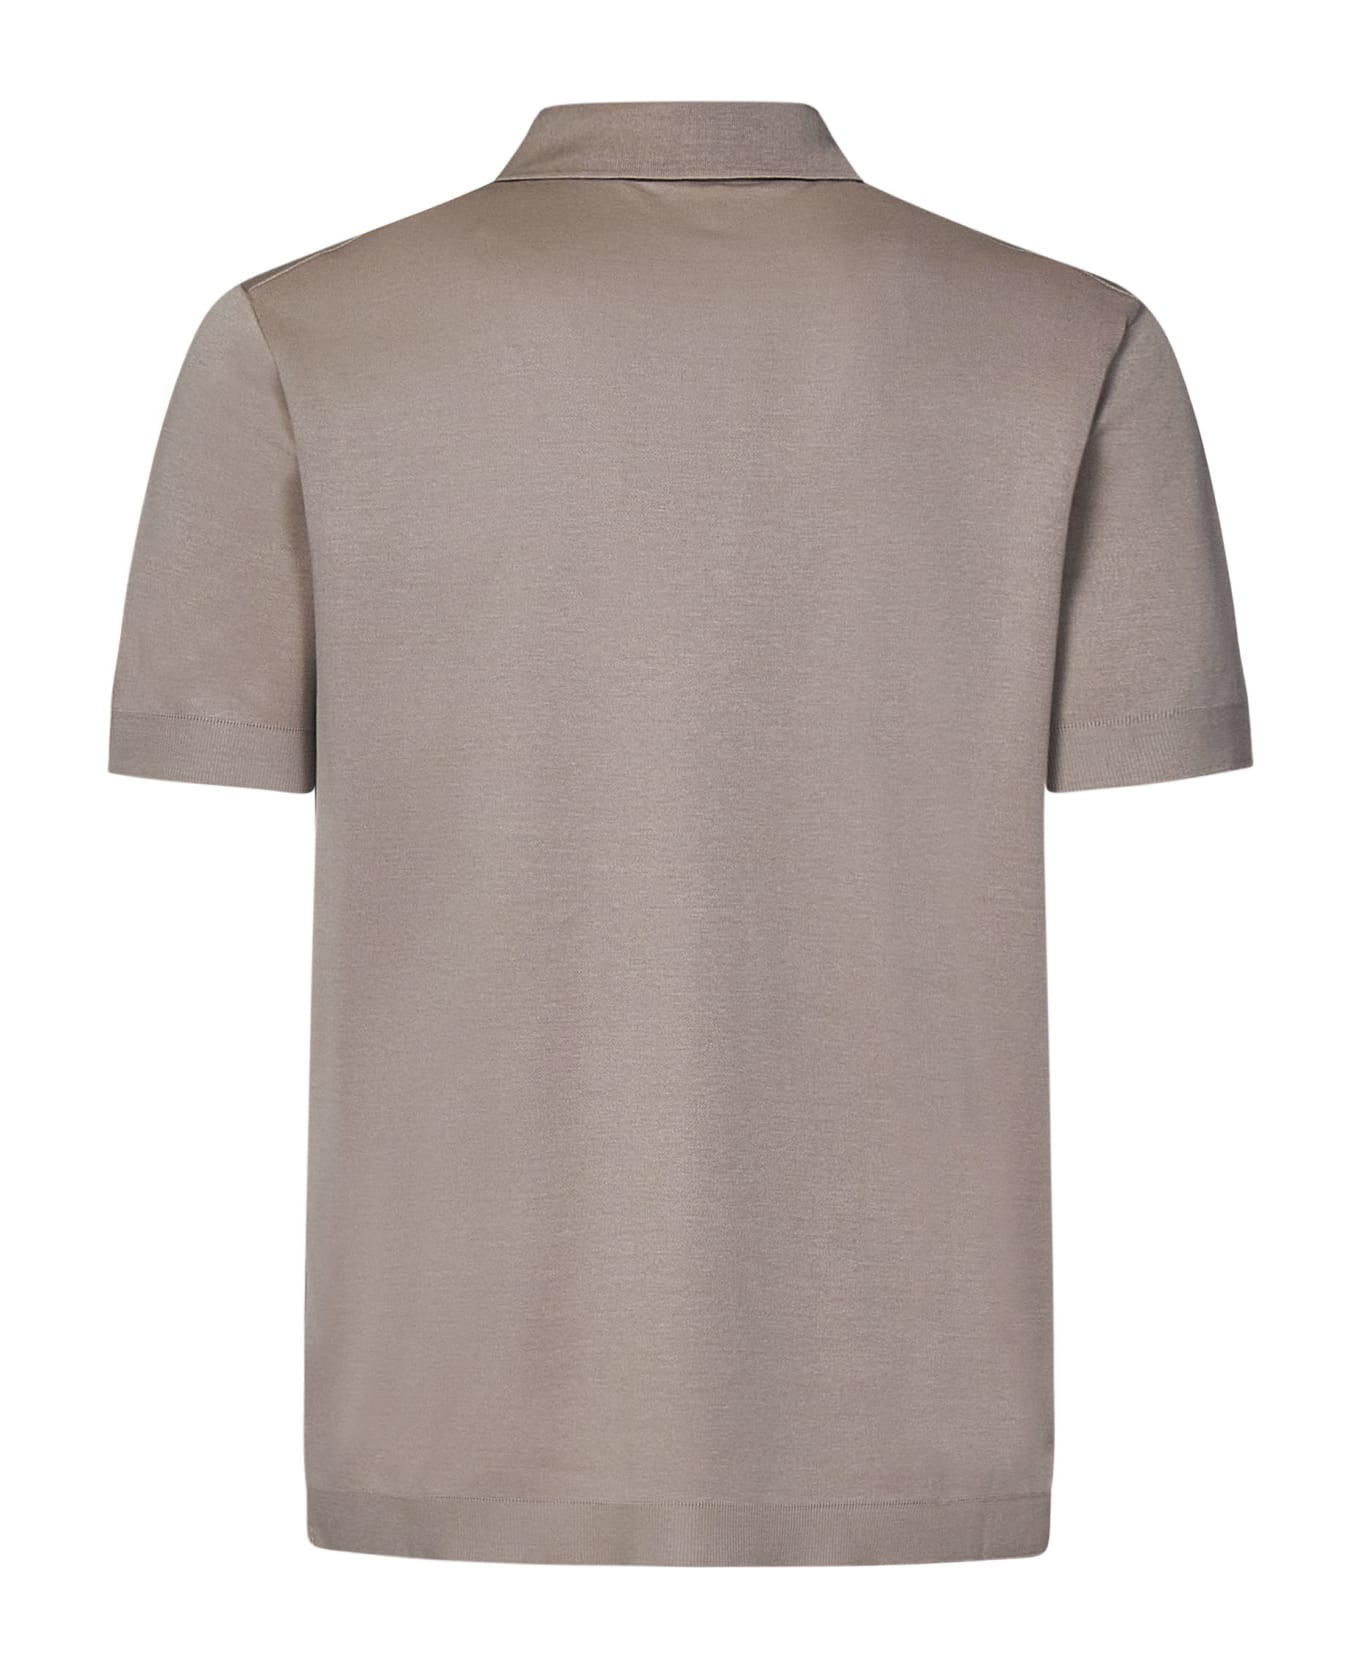 Herno Polo Shirt - Beige ポロシャツ